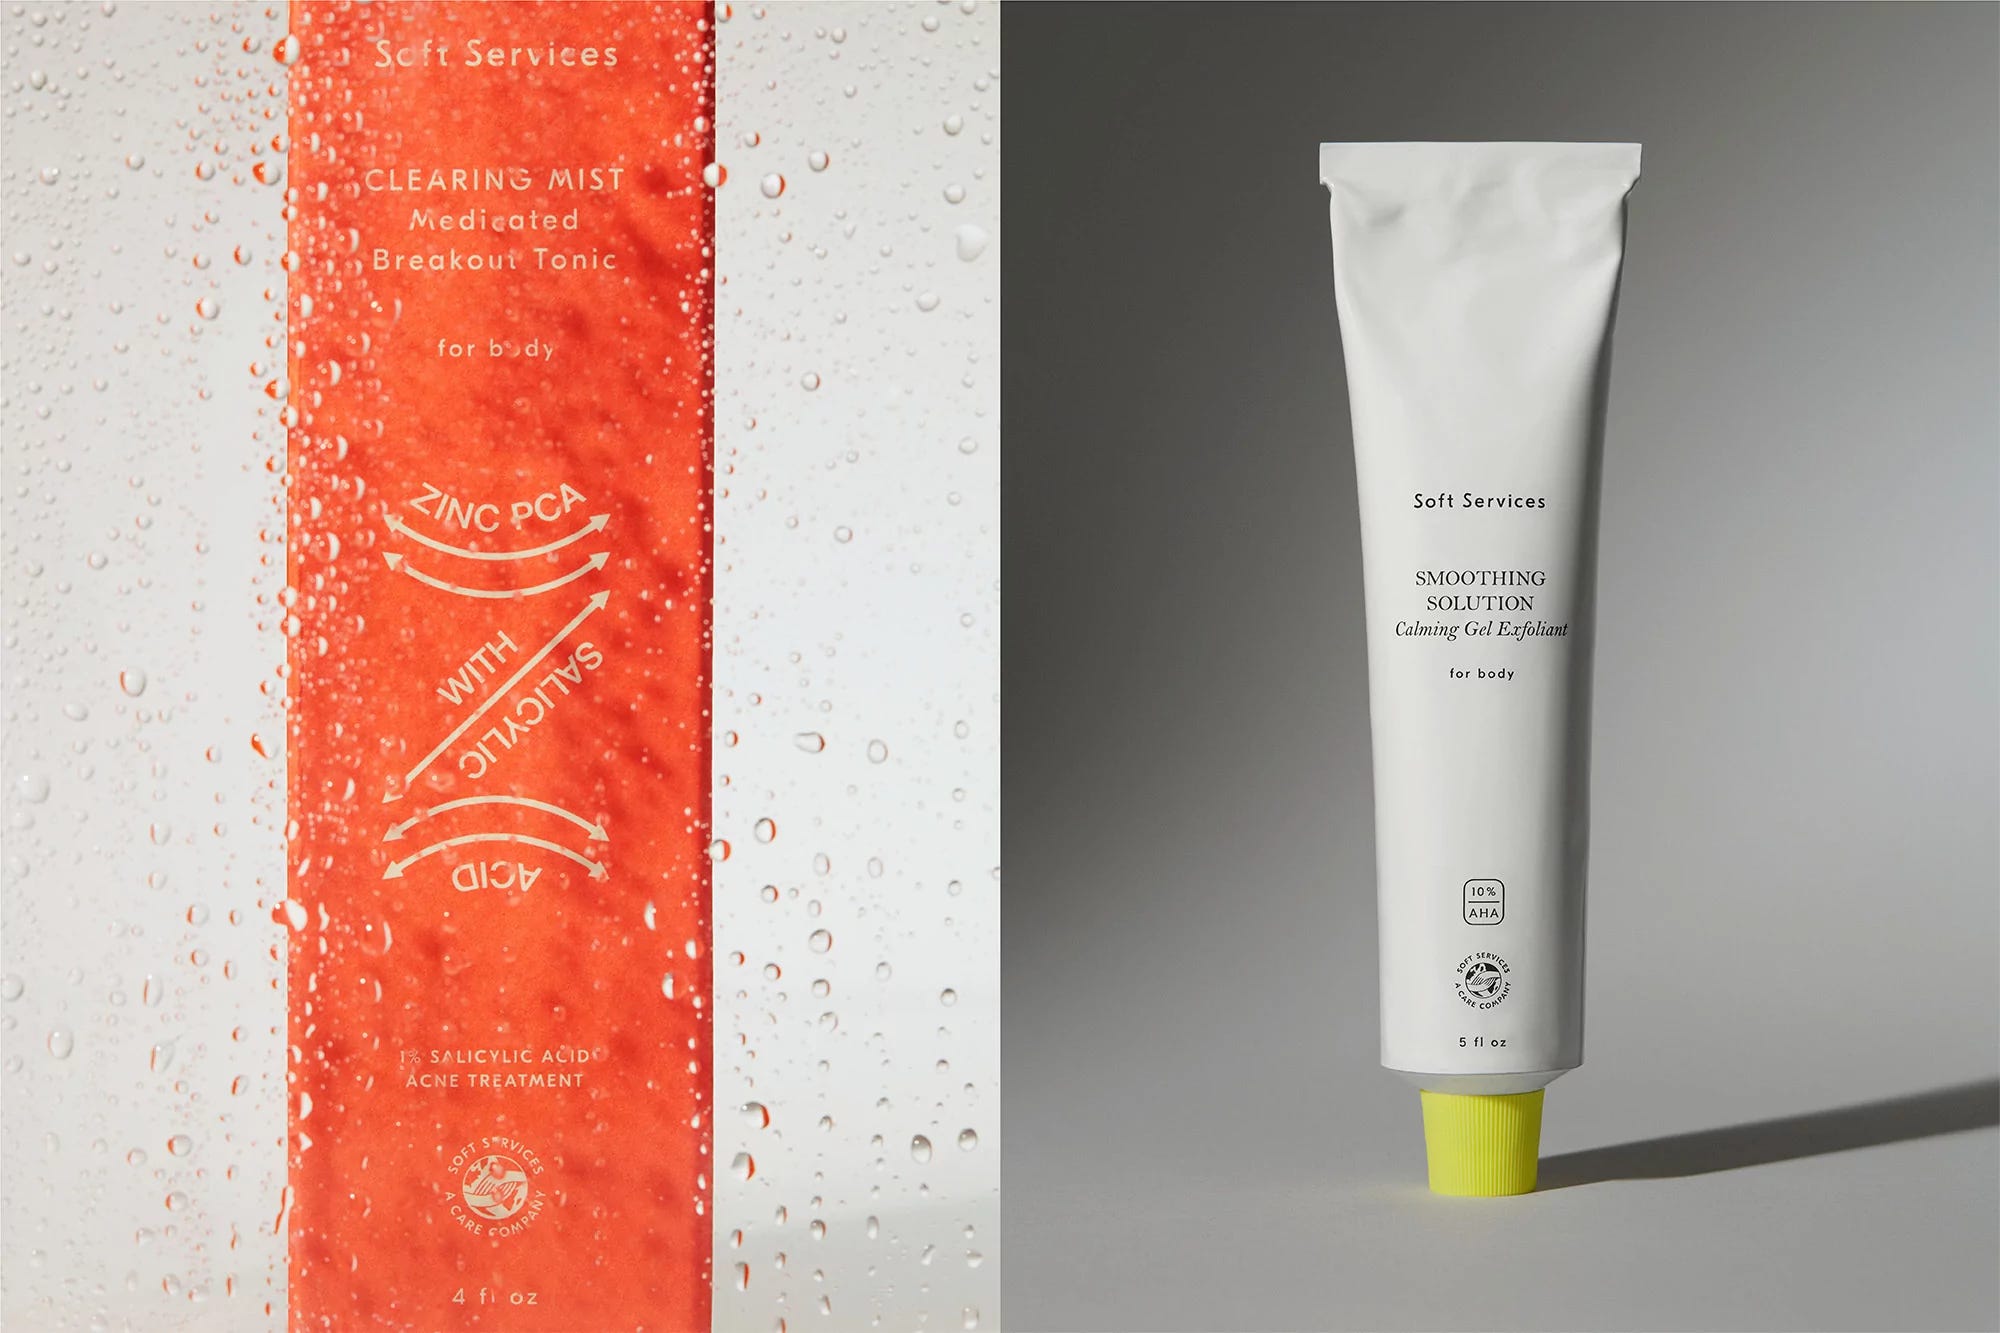 Two photographs of skincare products: on the left, a red box labeled "Clearing Mist" seen through drops of water; on the right, a tube of "smoothing solution" with a yellow cap stands upright on a gray background